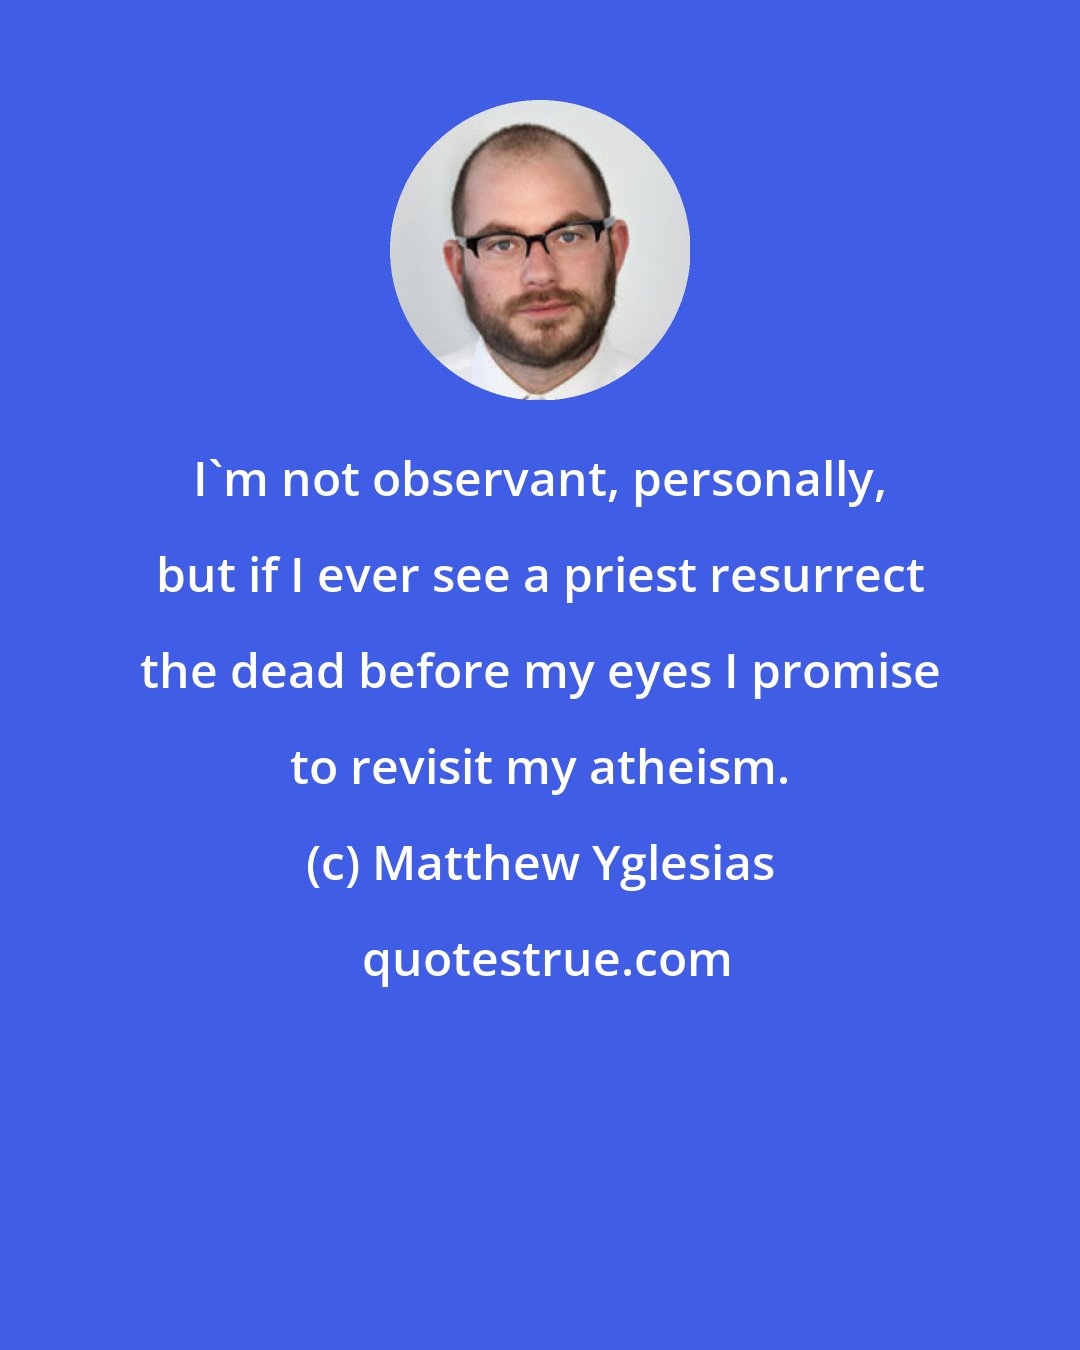 Matthew Yglesias: I'm not observant, personally, but if I ever see a priest resurrect the dead before my eyes I promise to revisit my atheism.